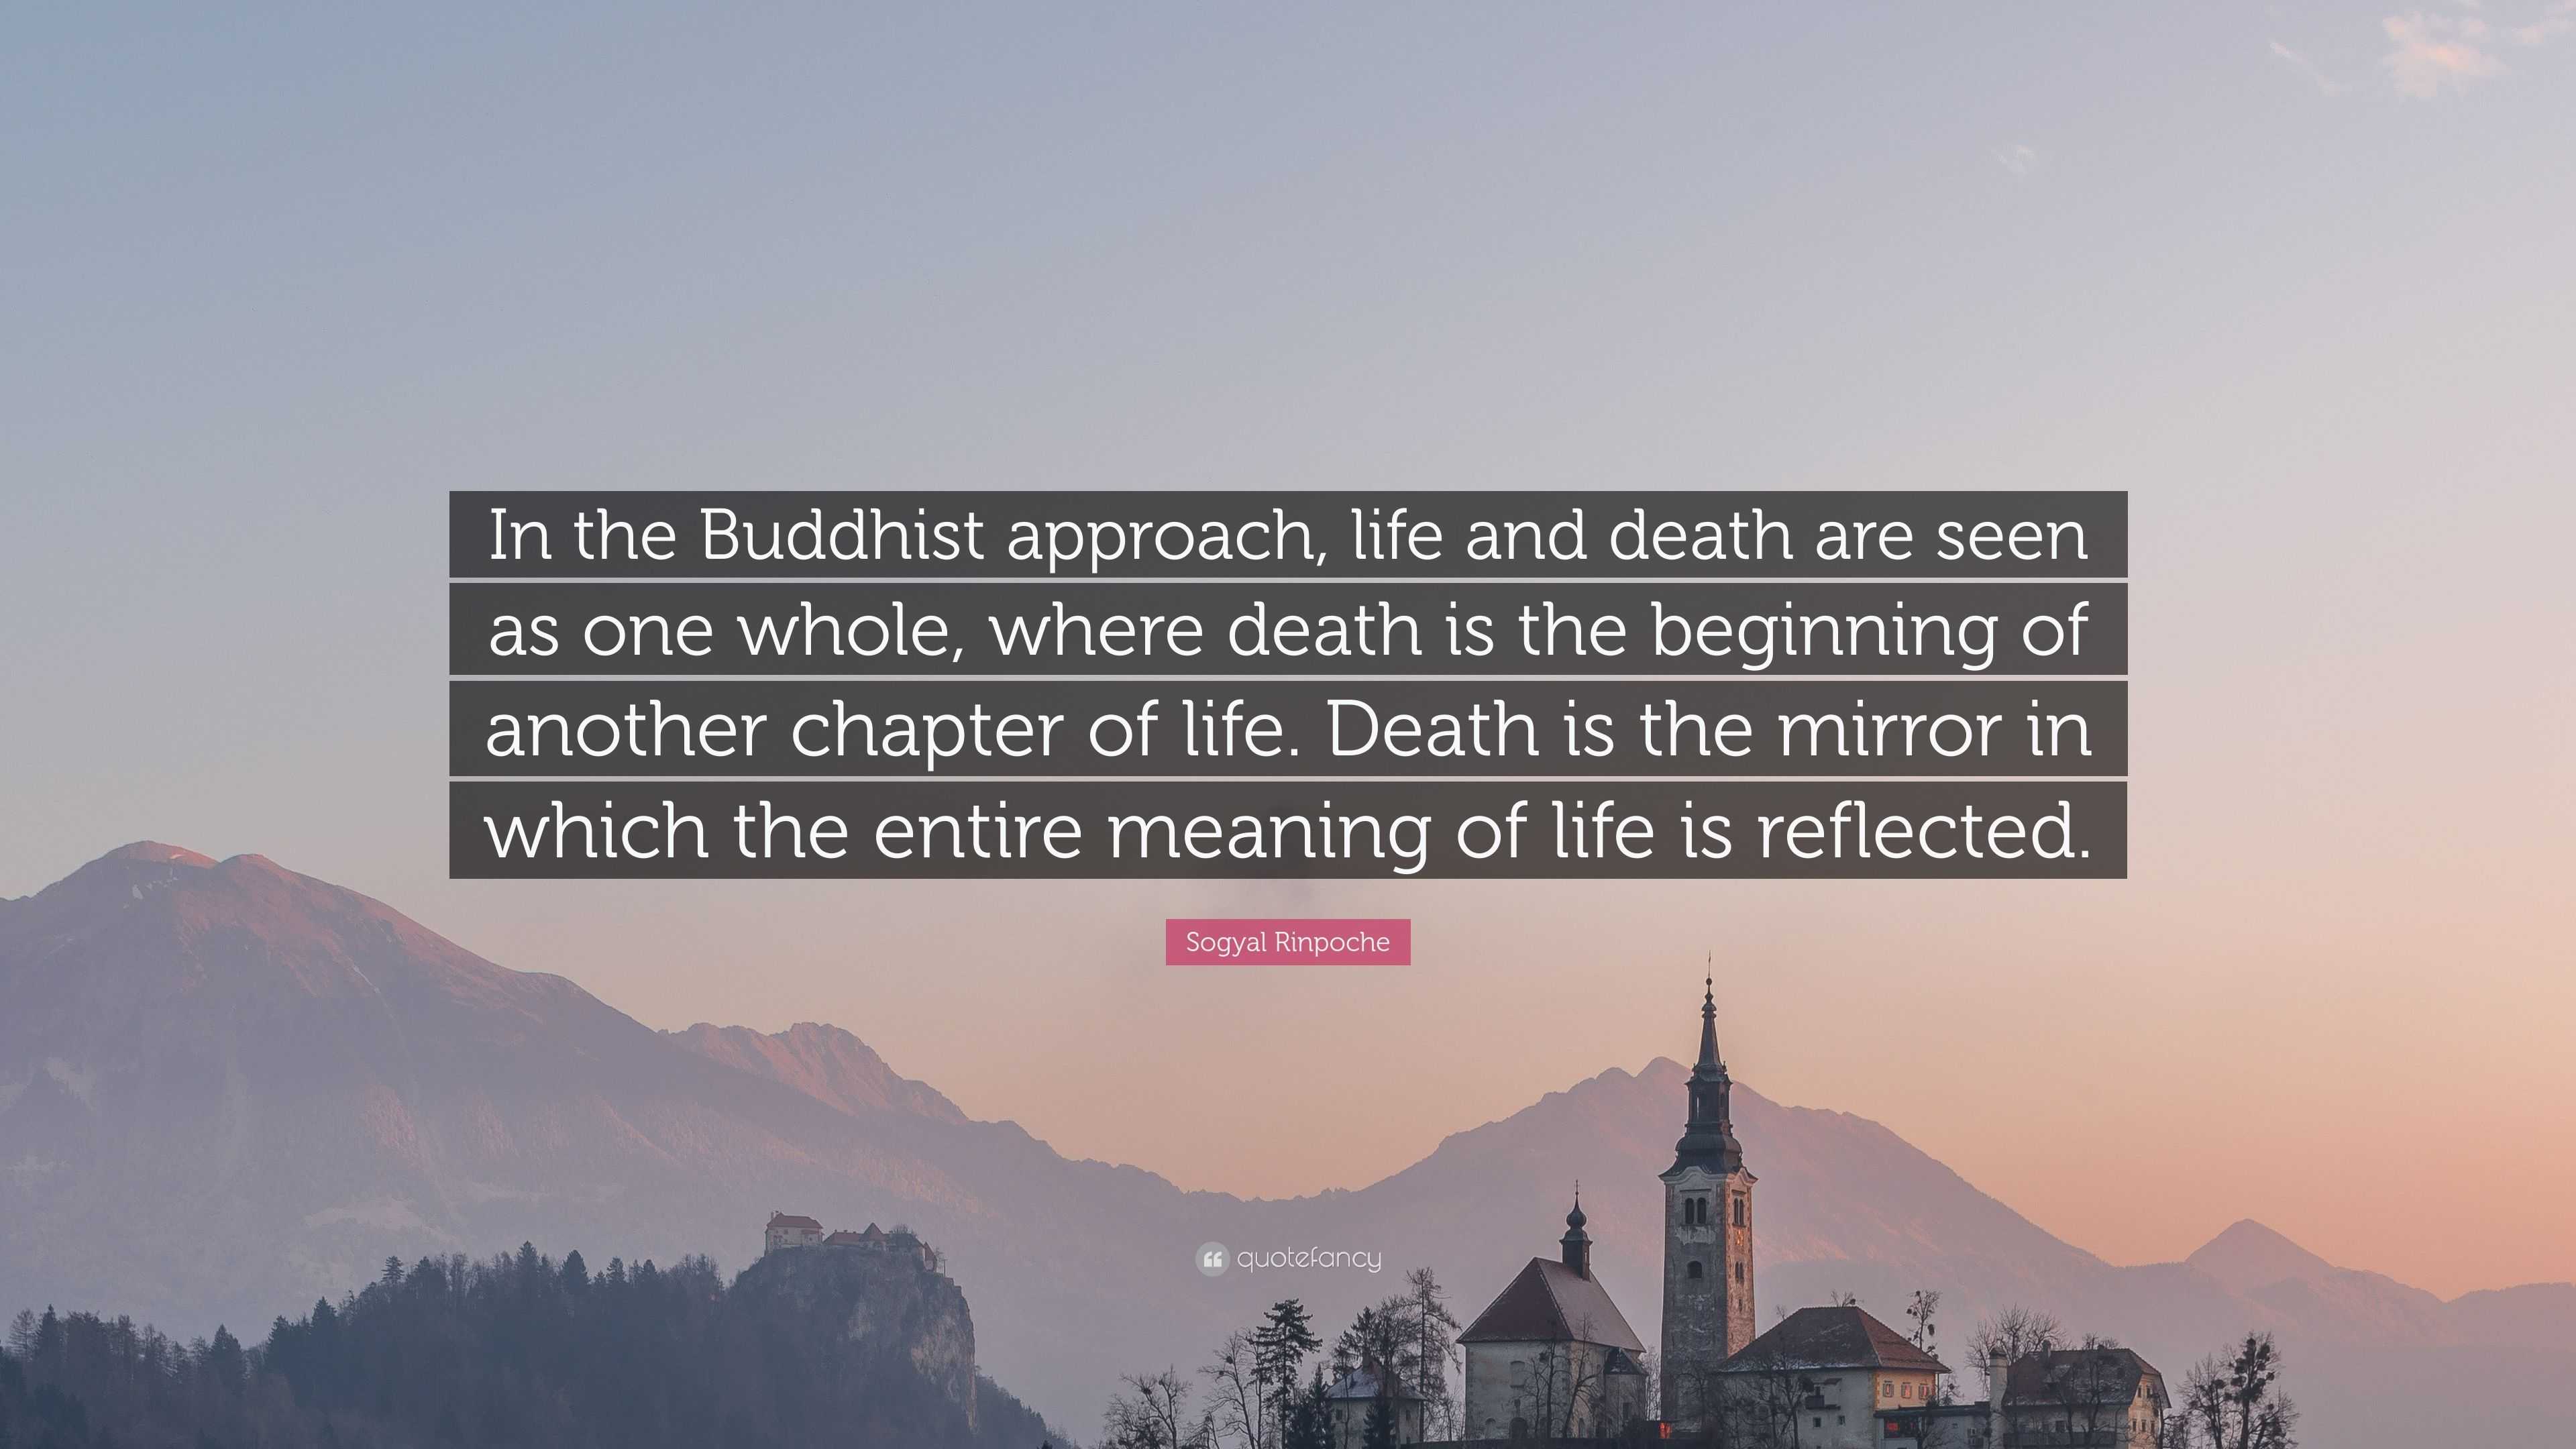 Sogyal Rinpoche Quote “In the Buddhist approach life and are seen as